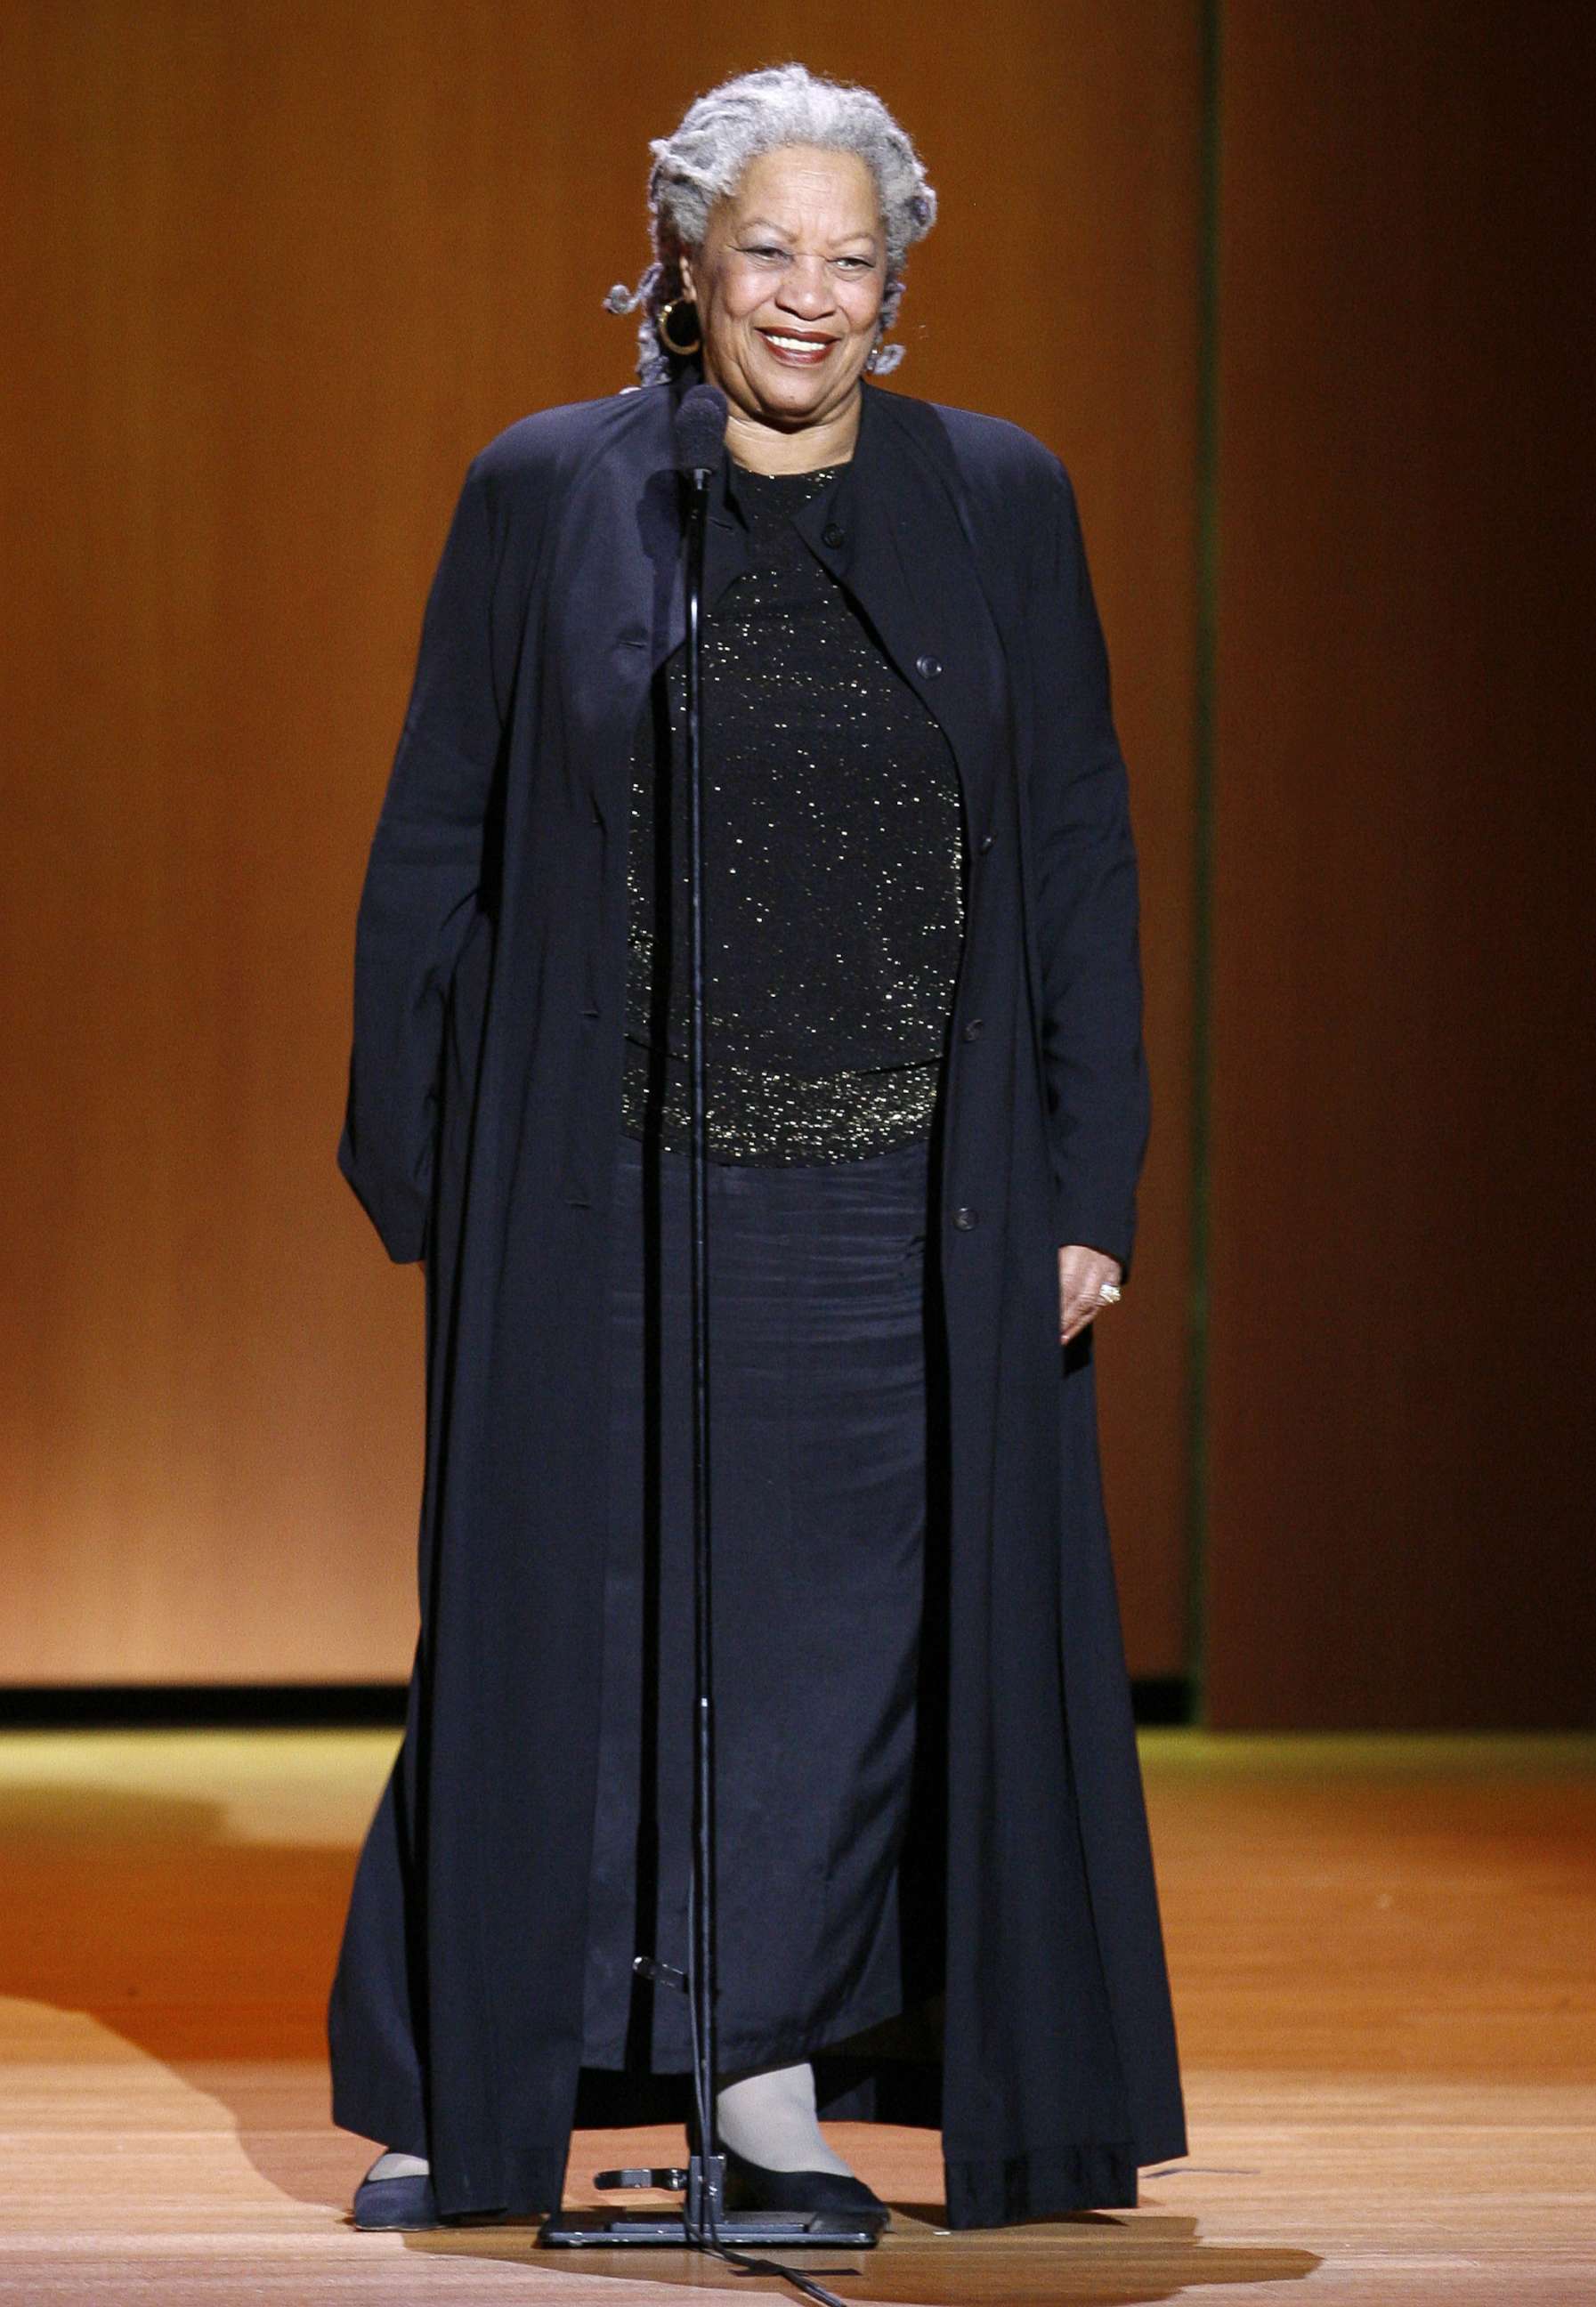 PHOTO: Writer Toni Morrison accepts an awards at Lincoln Center's Avery Fisher Hall, Nov. 5, 2007 in New York.